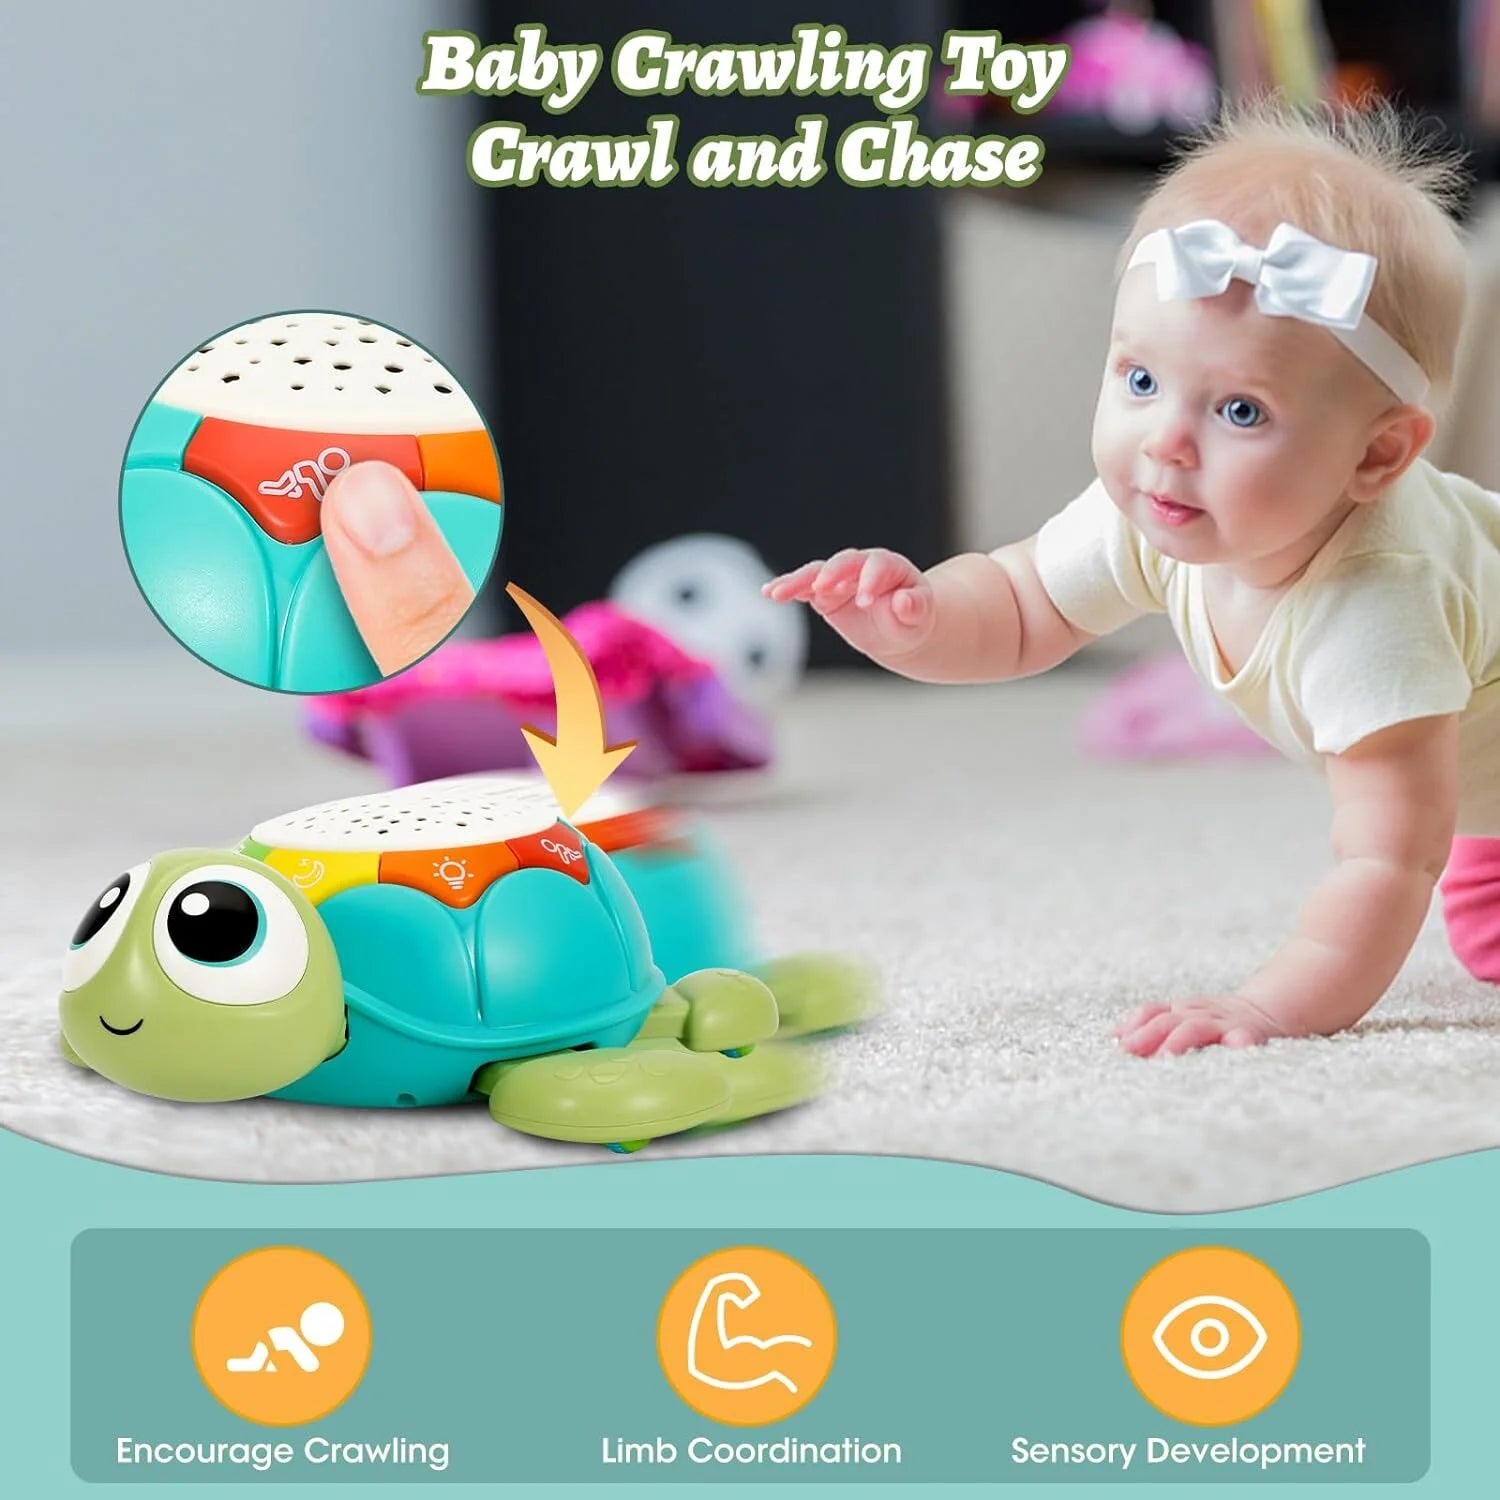 Baby Toys 6 to 12 Months, Musical Turtle Crawling Baby Toys for 12-18 Months, Early Learning Educational Toy with Light & Sound, Birthday Toy for Infant Toddler Boy Girl 7 8 9 10 Month 1-2 Year Old